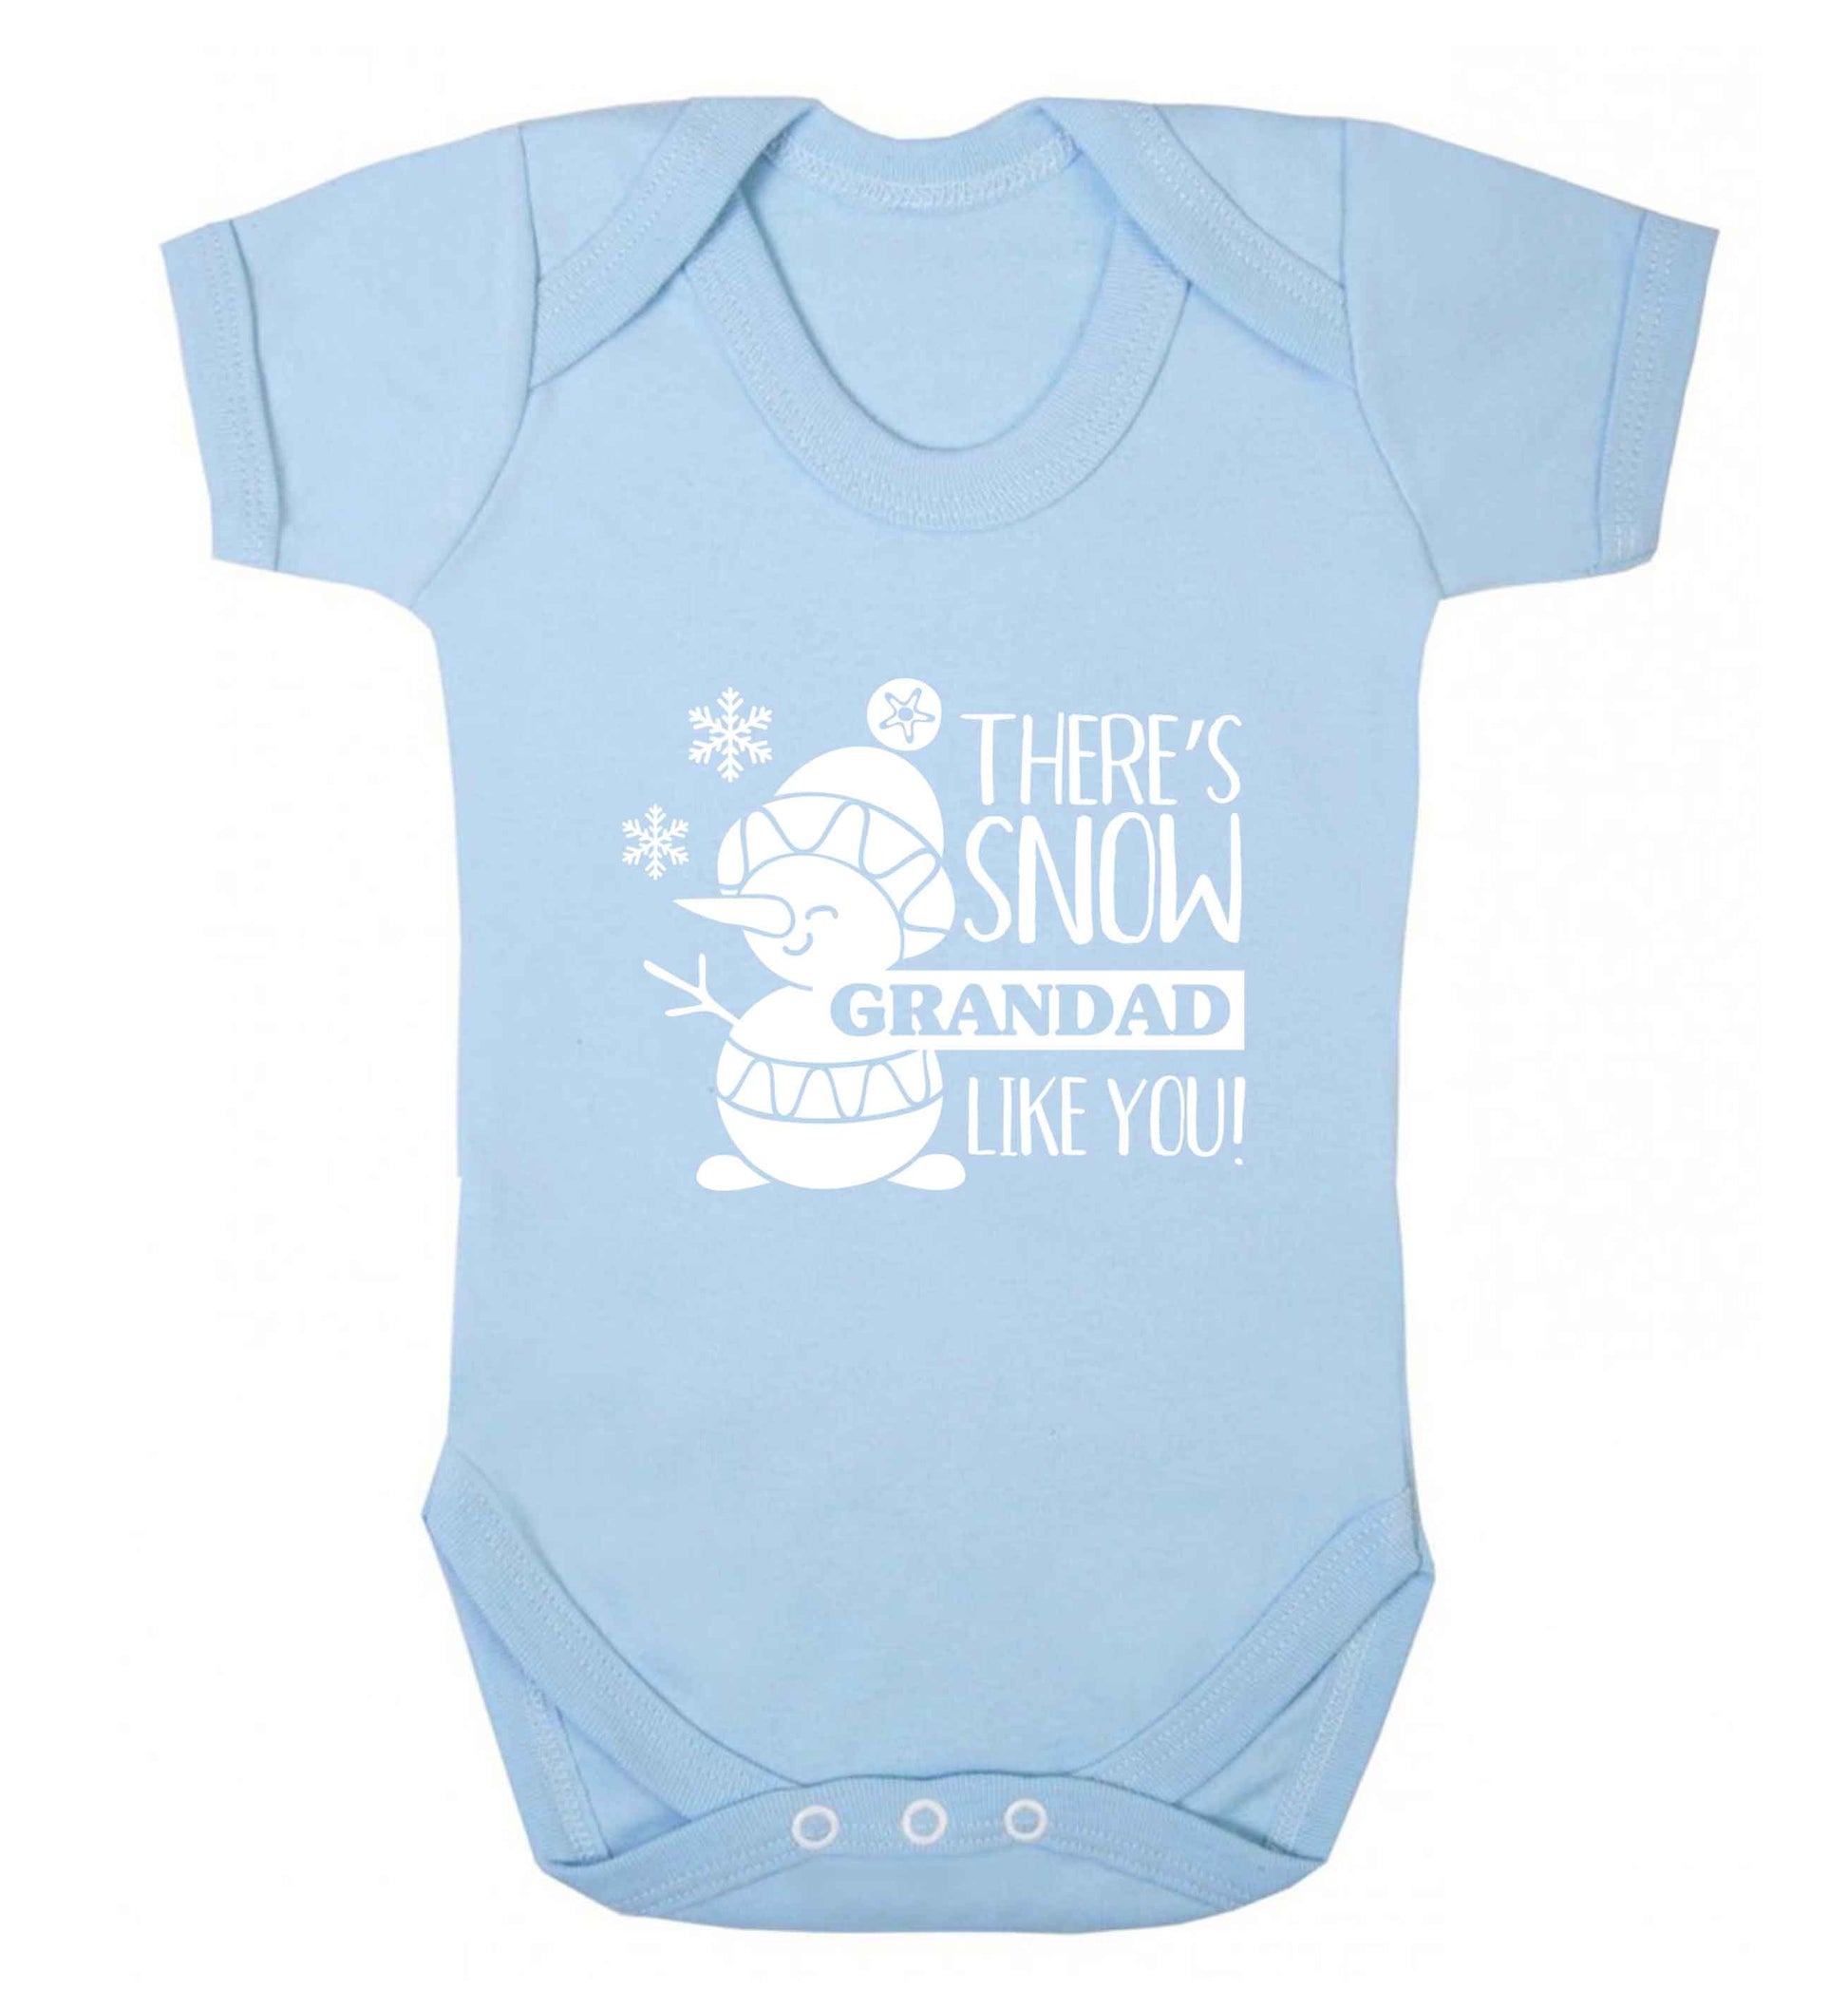 There's snow grandad like you baby vest pale blue 18-24 months